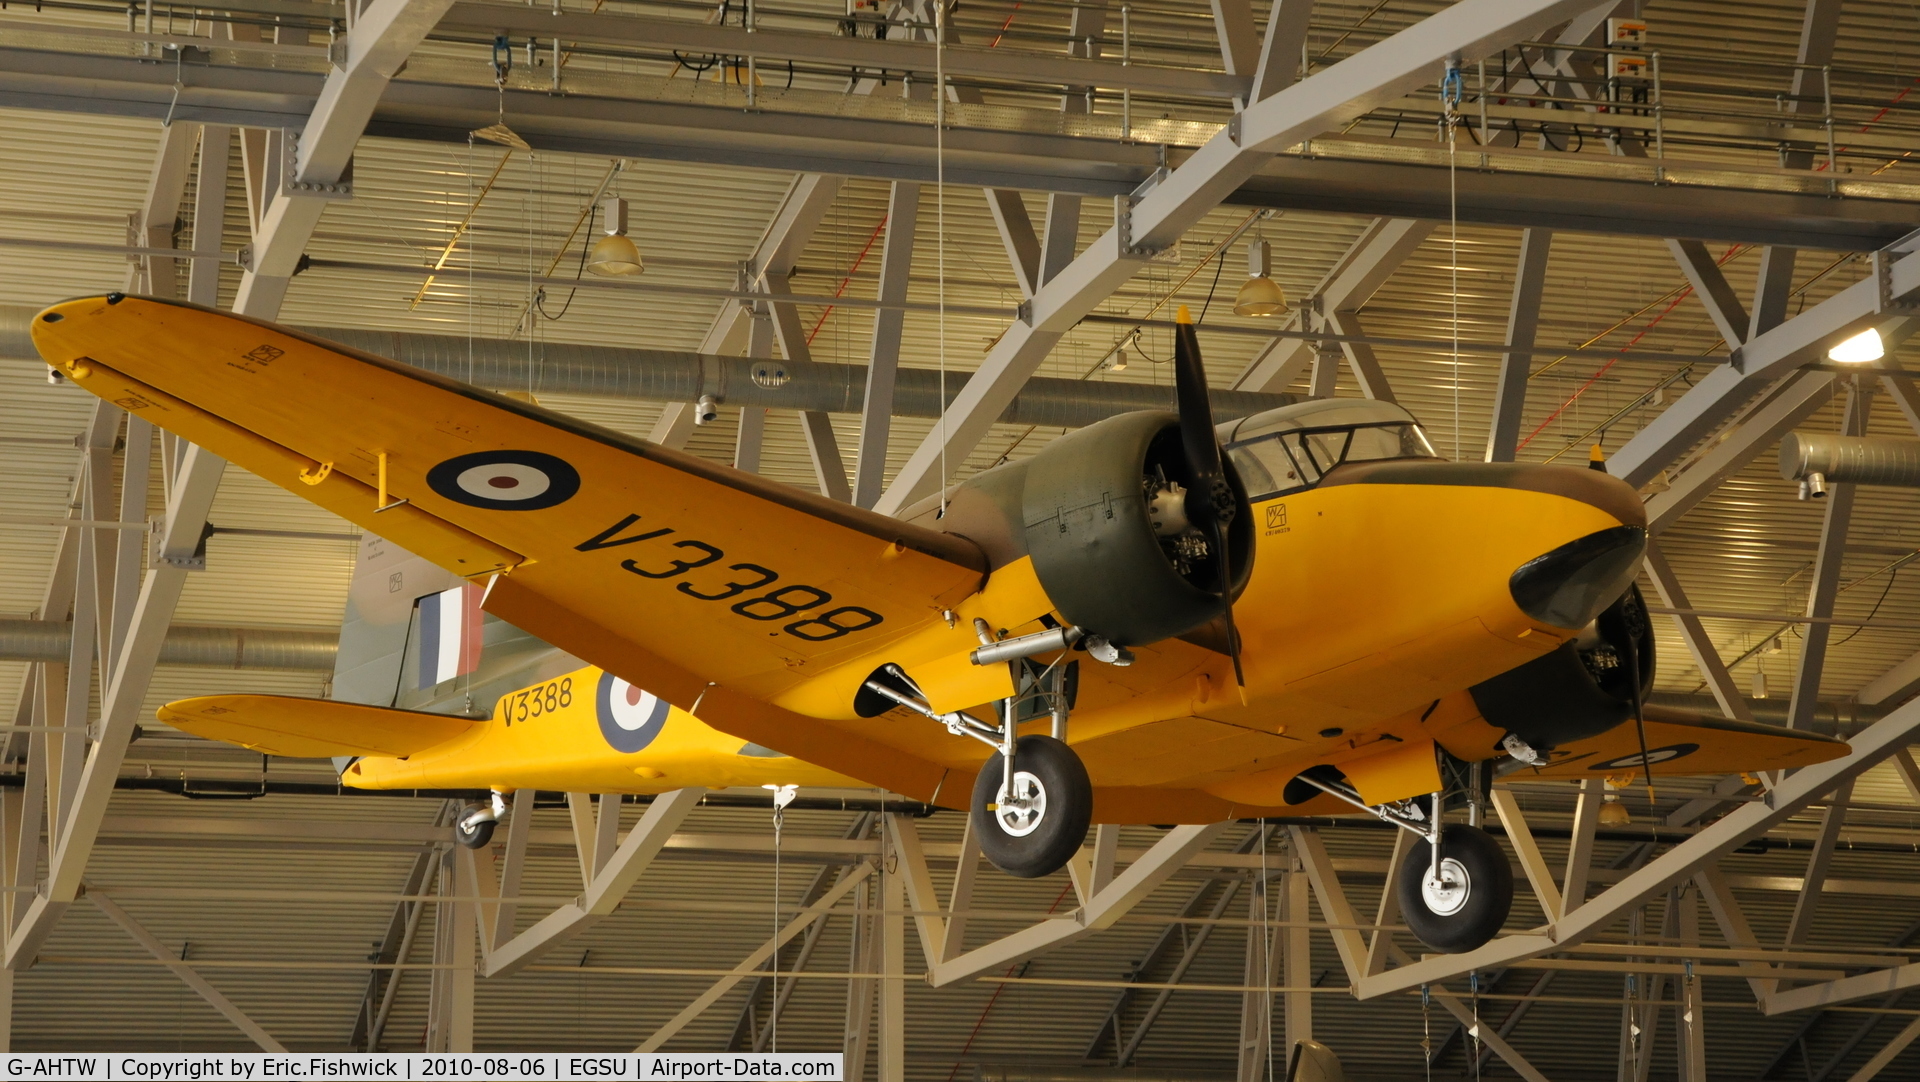 G-AHTW, 1940 Airspeed AS.10 Oxford I C/N 3083, 3. Airspeed AS-40 Oxford 1 at The Imperial War Museum, Duxford